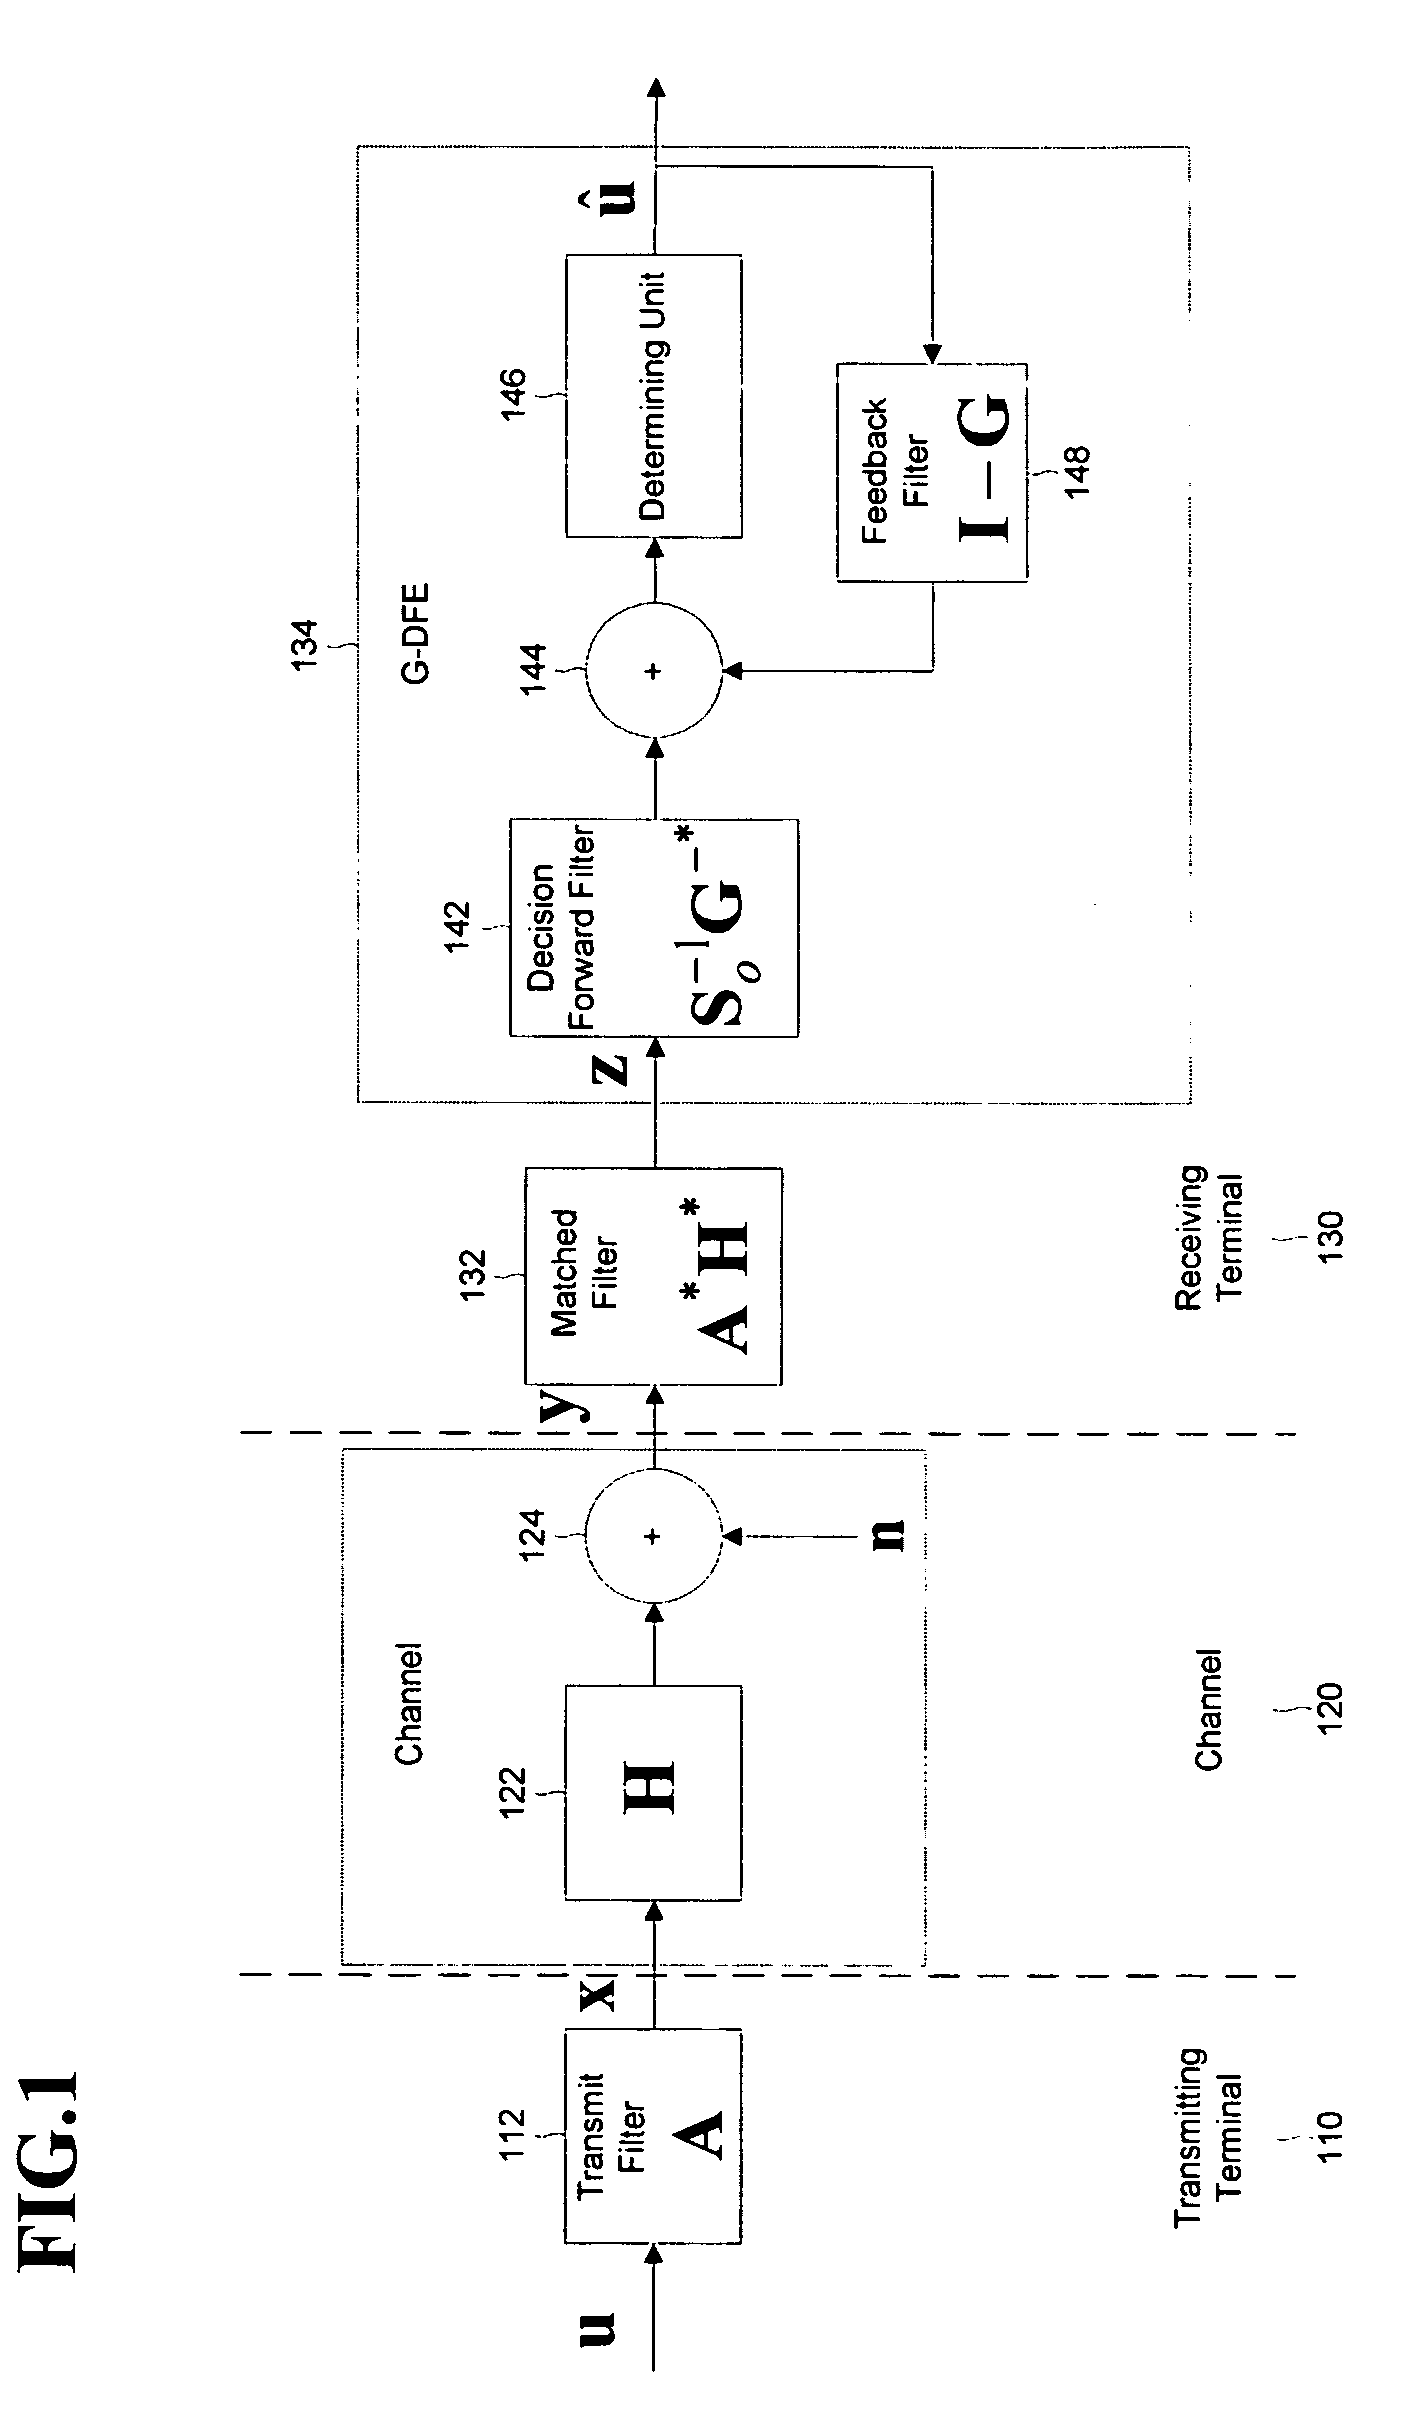 Method and apparatus for cancellation of cross-talk signals using multi-dimensional coordination and vectored transmission